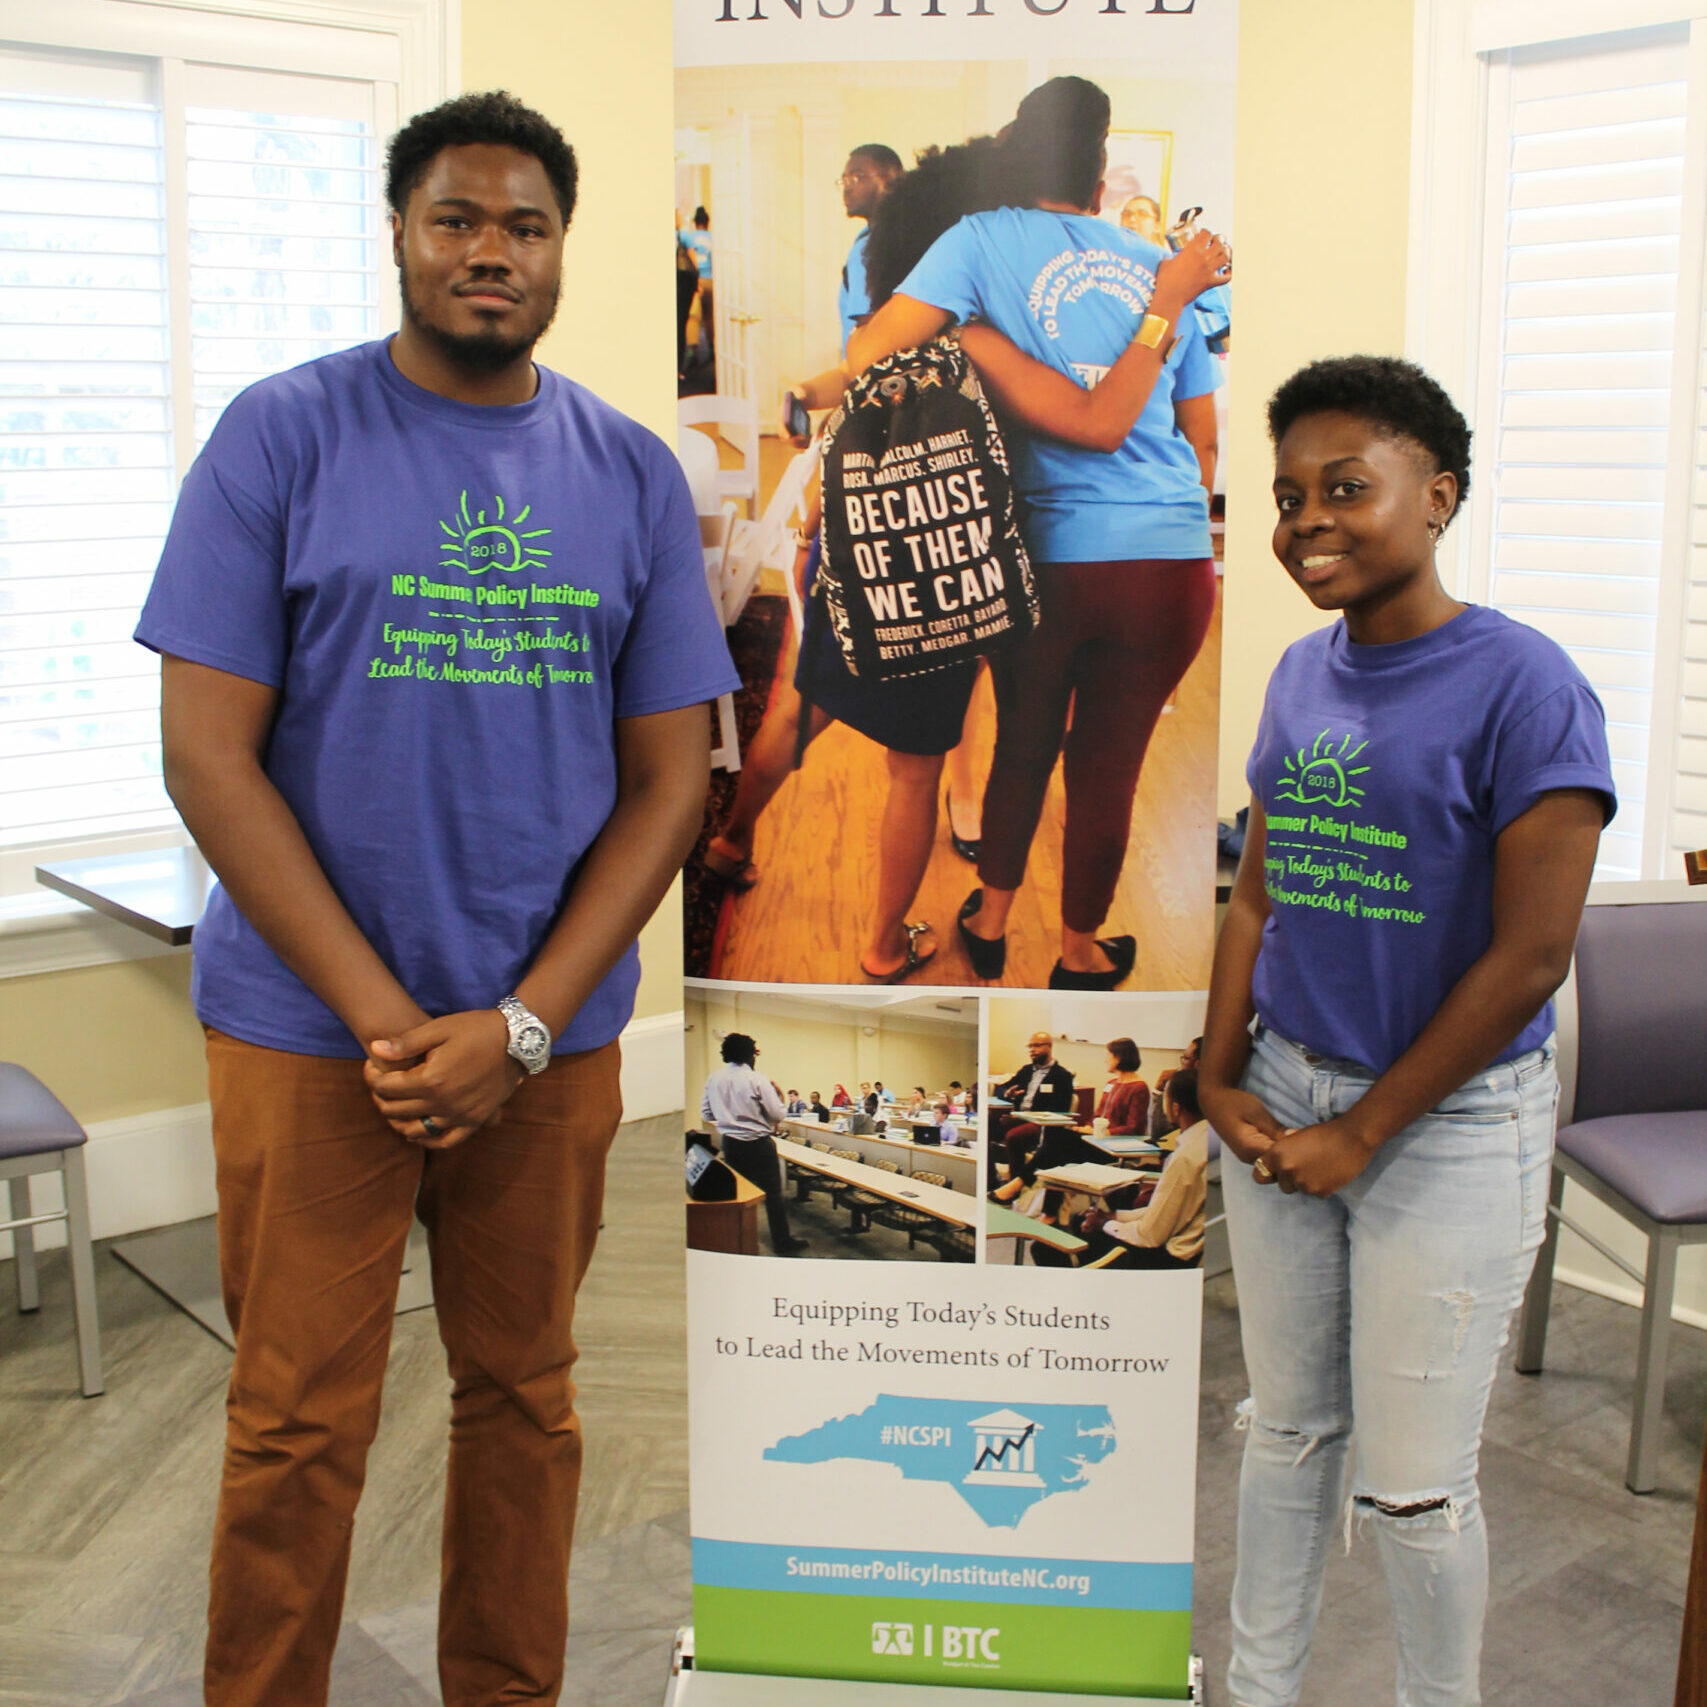 Brian Kennedy II and Chane Wilson were the founders of the NC Summer Policy Institute.